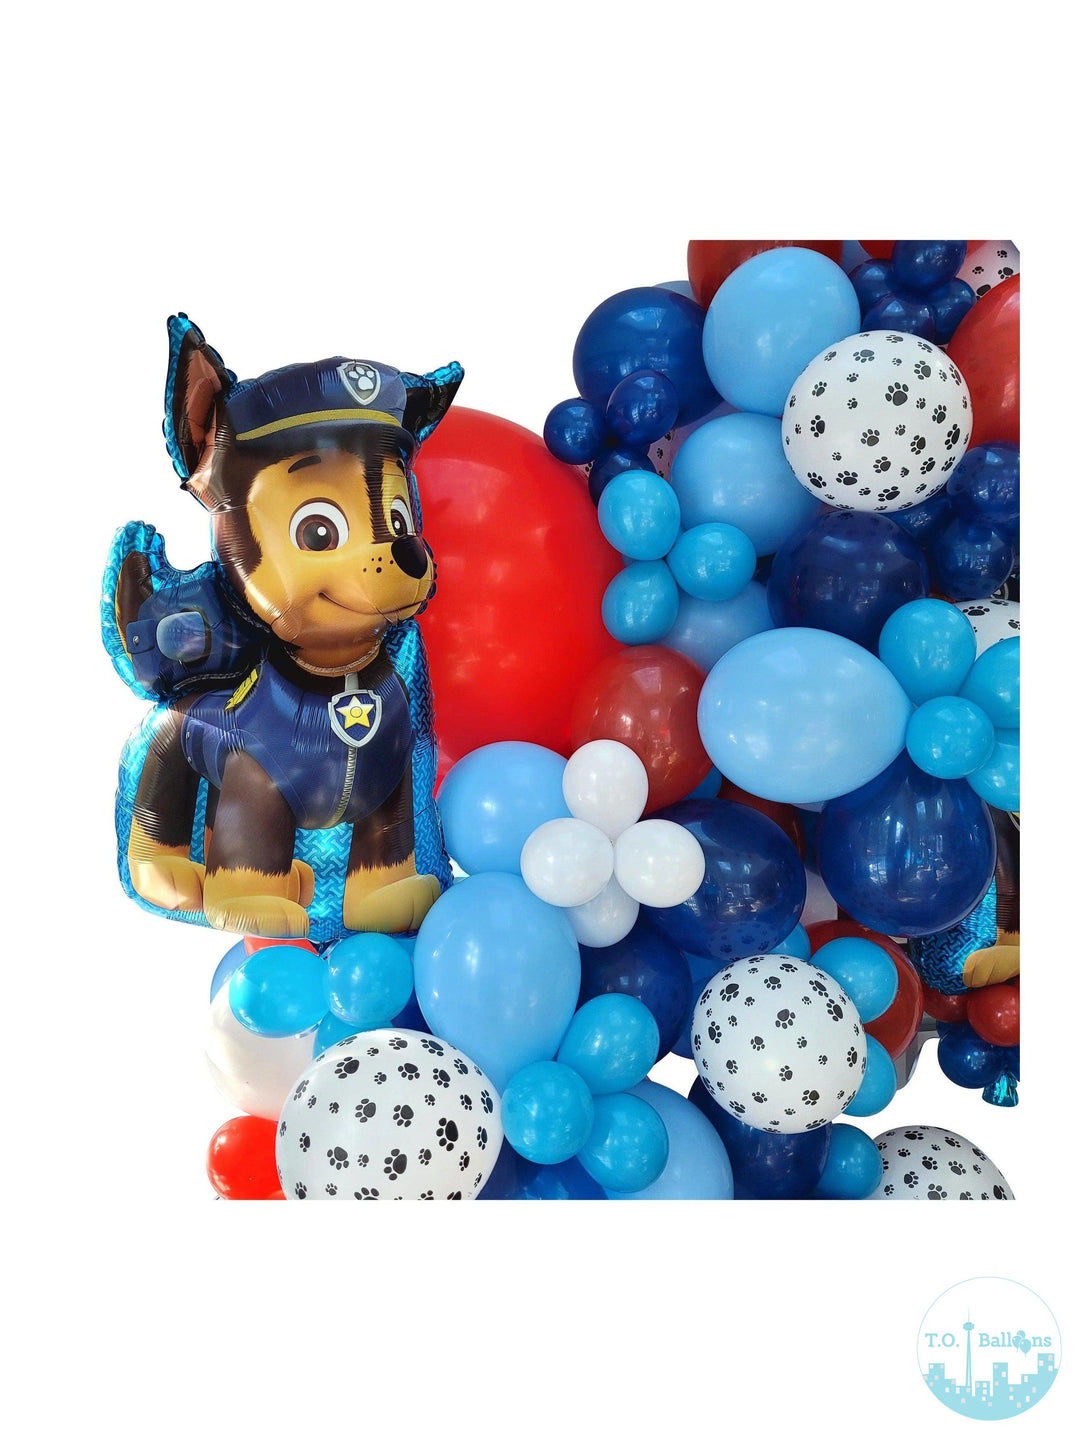 Paw Patrol Cluster Balloons T.O. Balloons 